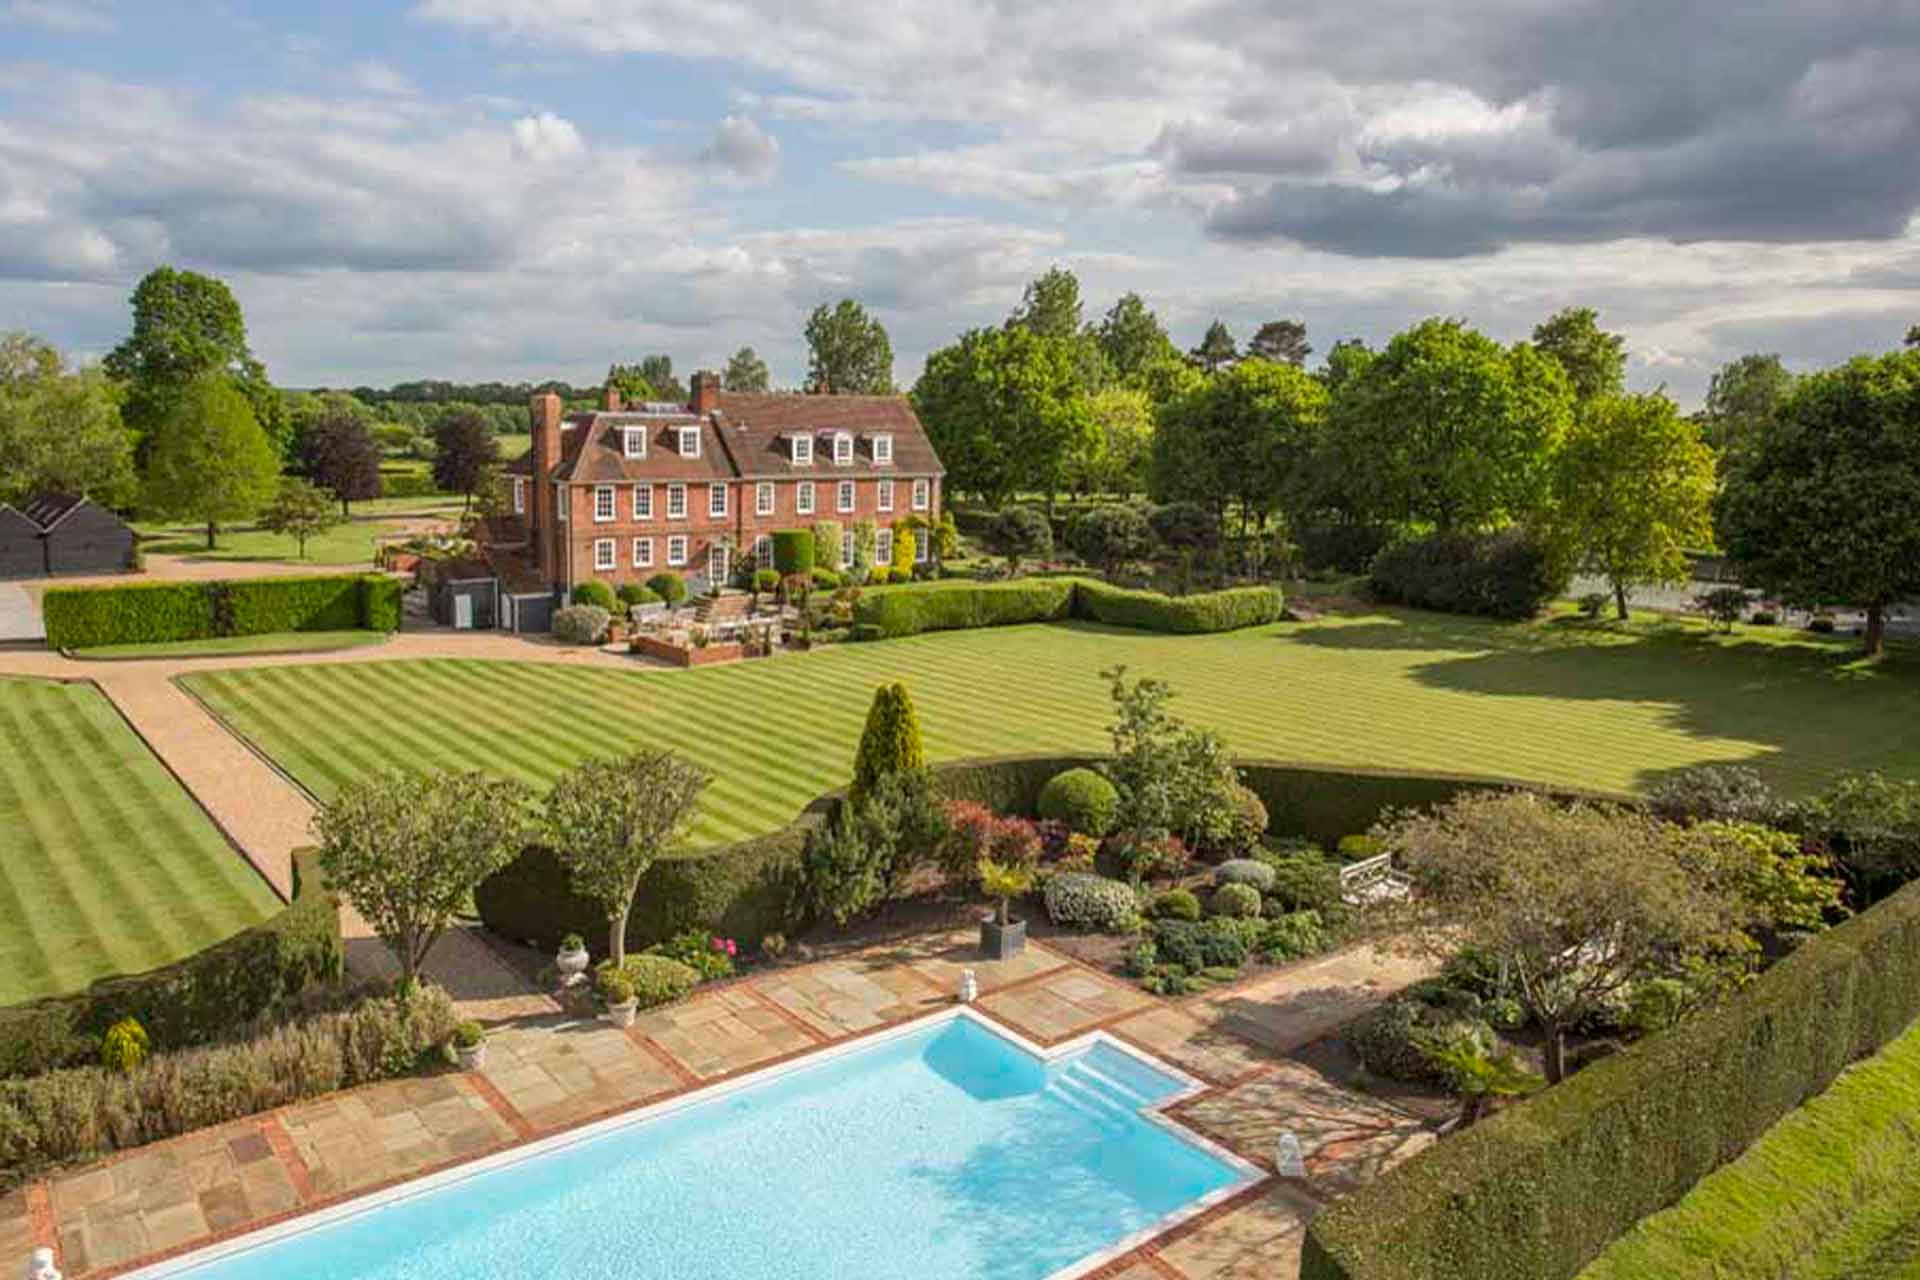 Aerial view of country home with expansive grounds and outdoor swimming pool